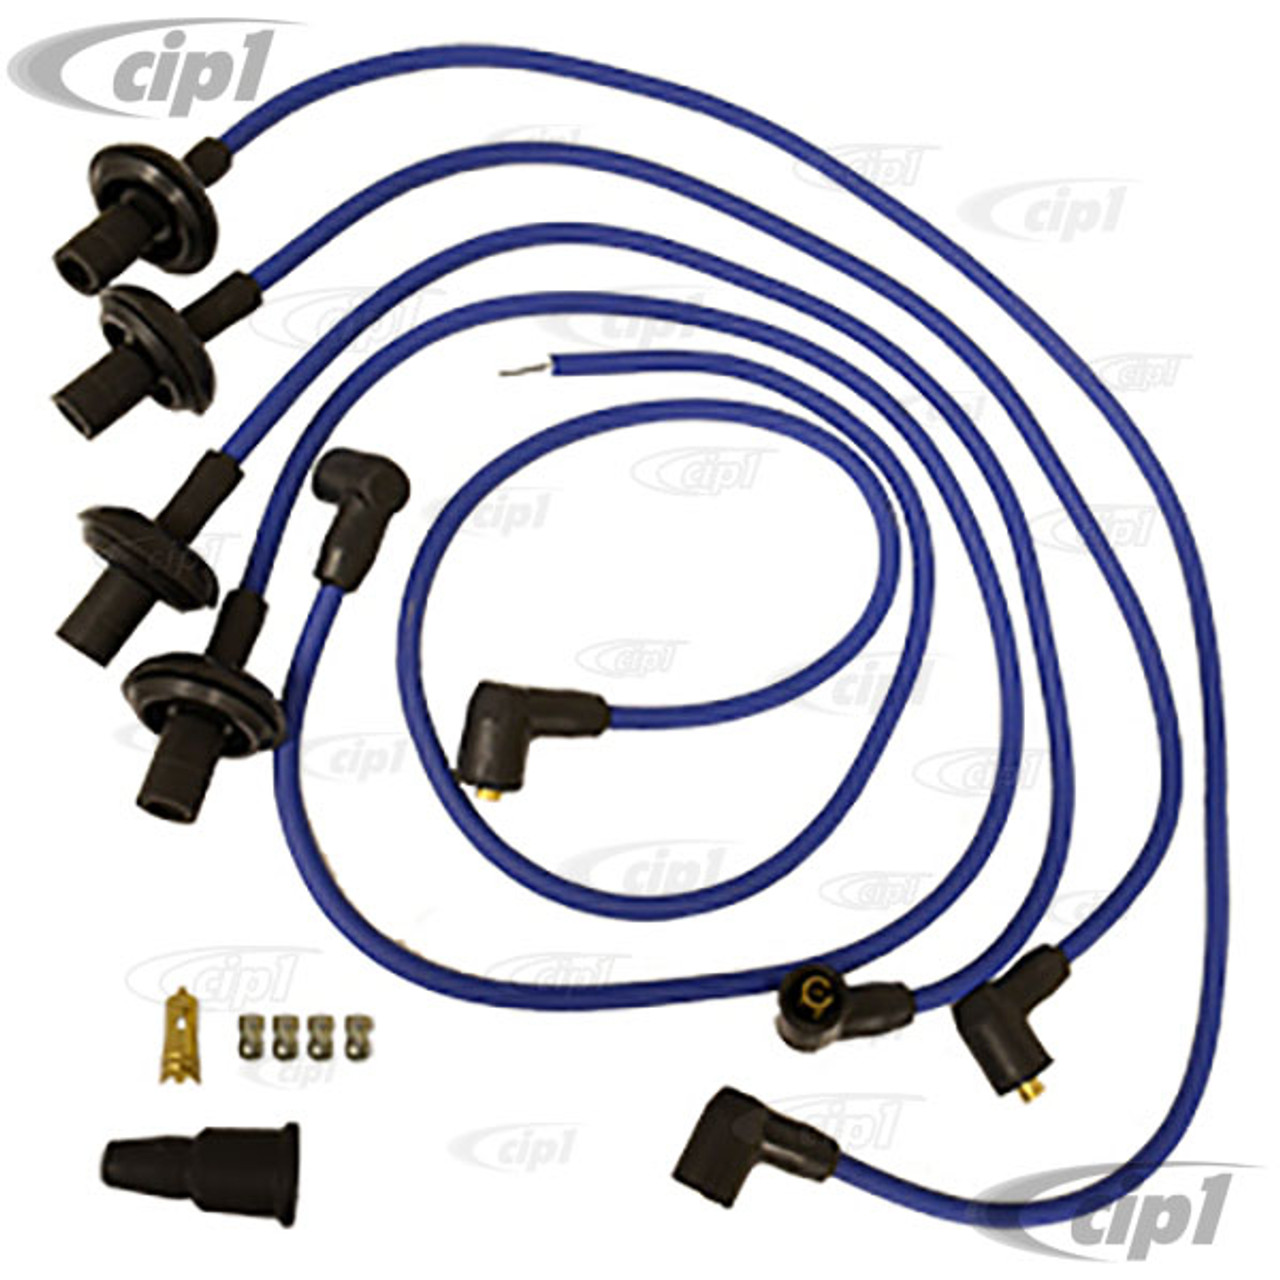 C13-9390 - SUPPRESSED IGNITION WIRE SET WITH 90 DEGREE CAP ENDS - BLUE -  ALL BEETLE/GHIA/BUS 52-71/TYPE-3 WITH 1600CC STYLE ENGINE (EXTRA LONG COIL  WIRE-CUT TO LENGTH) - SOLD SET